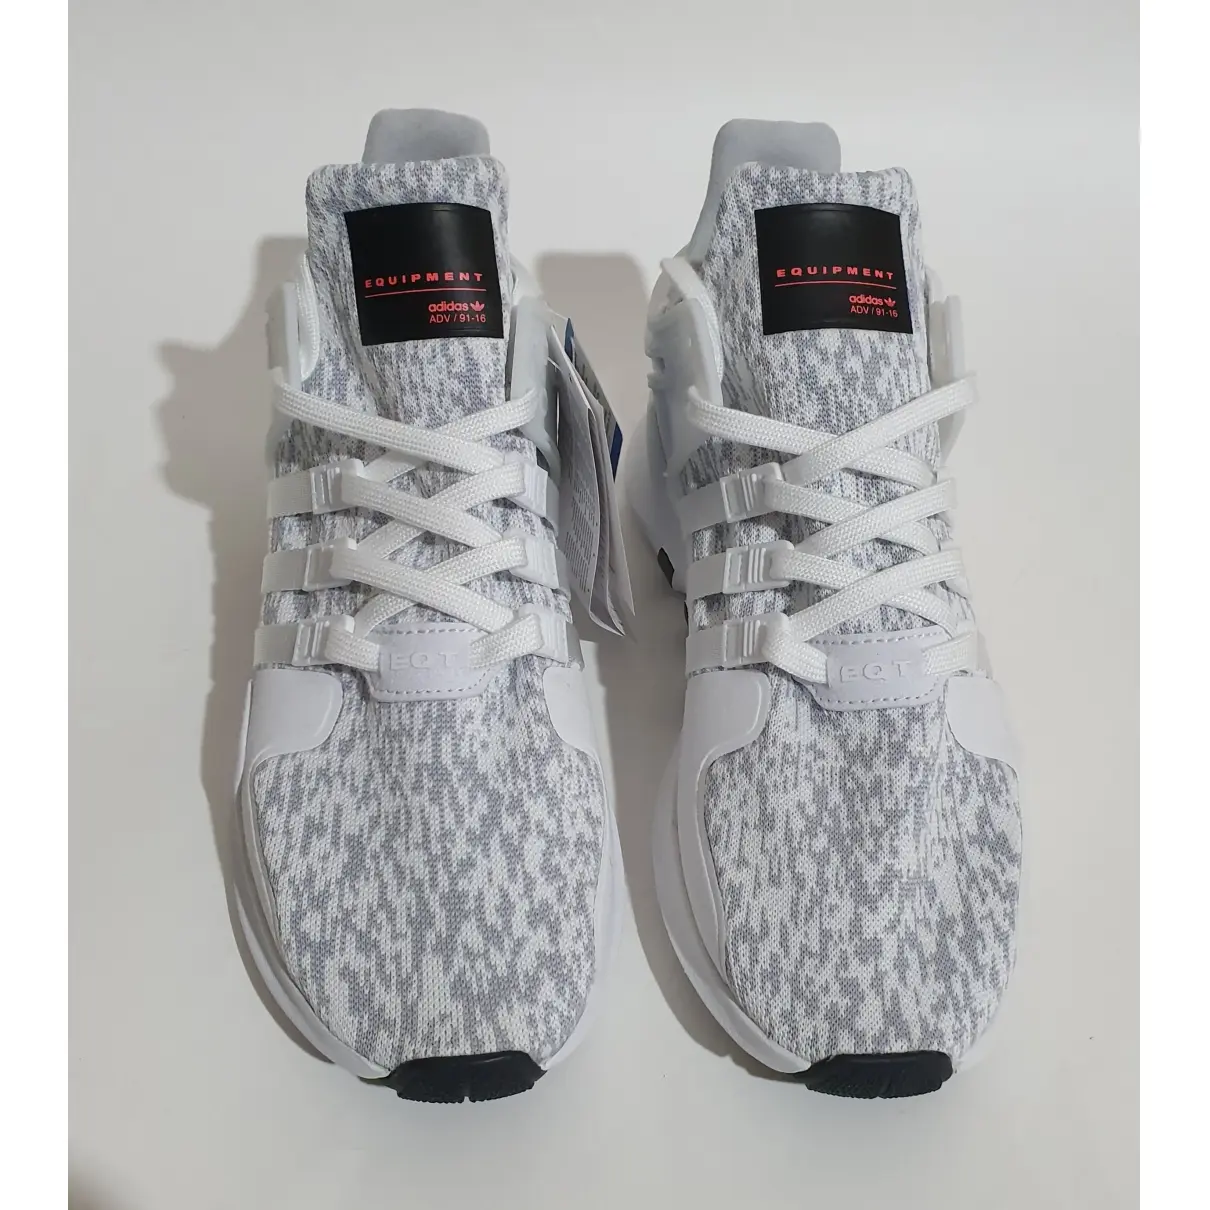 Adidas EQT Support cloth low trainers for sale